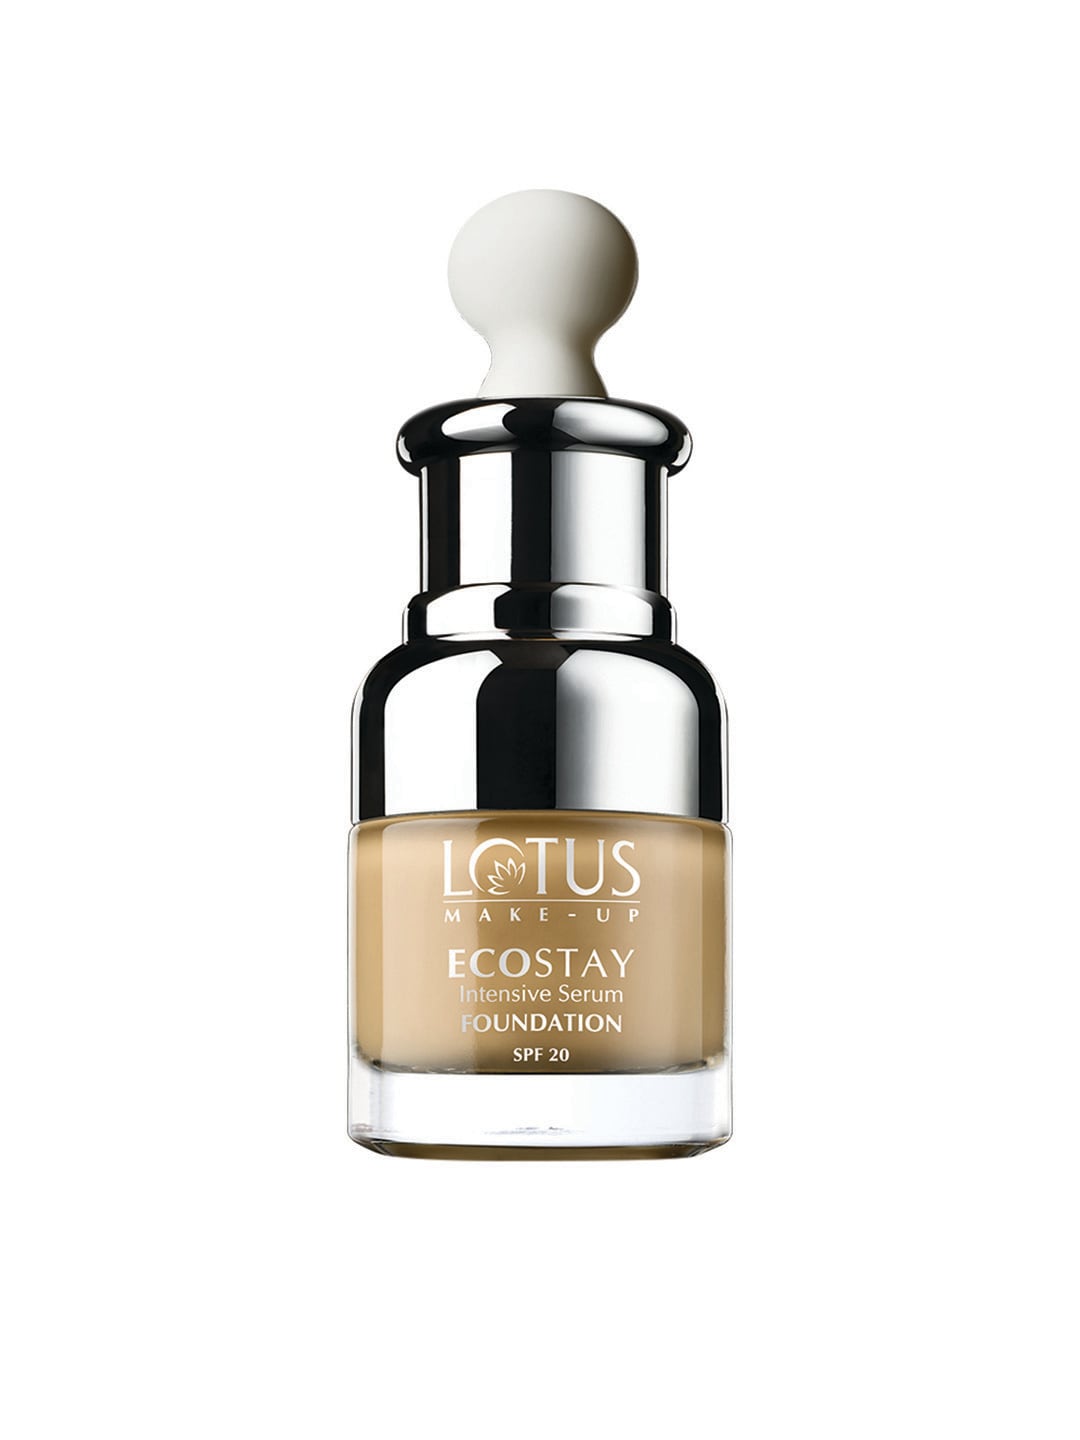 Lotus Herbals Make-Up Ecostay SPF 20 Intensive Serum Foundation - Ivory IS03 Price in India